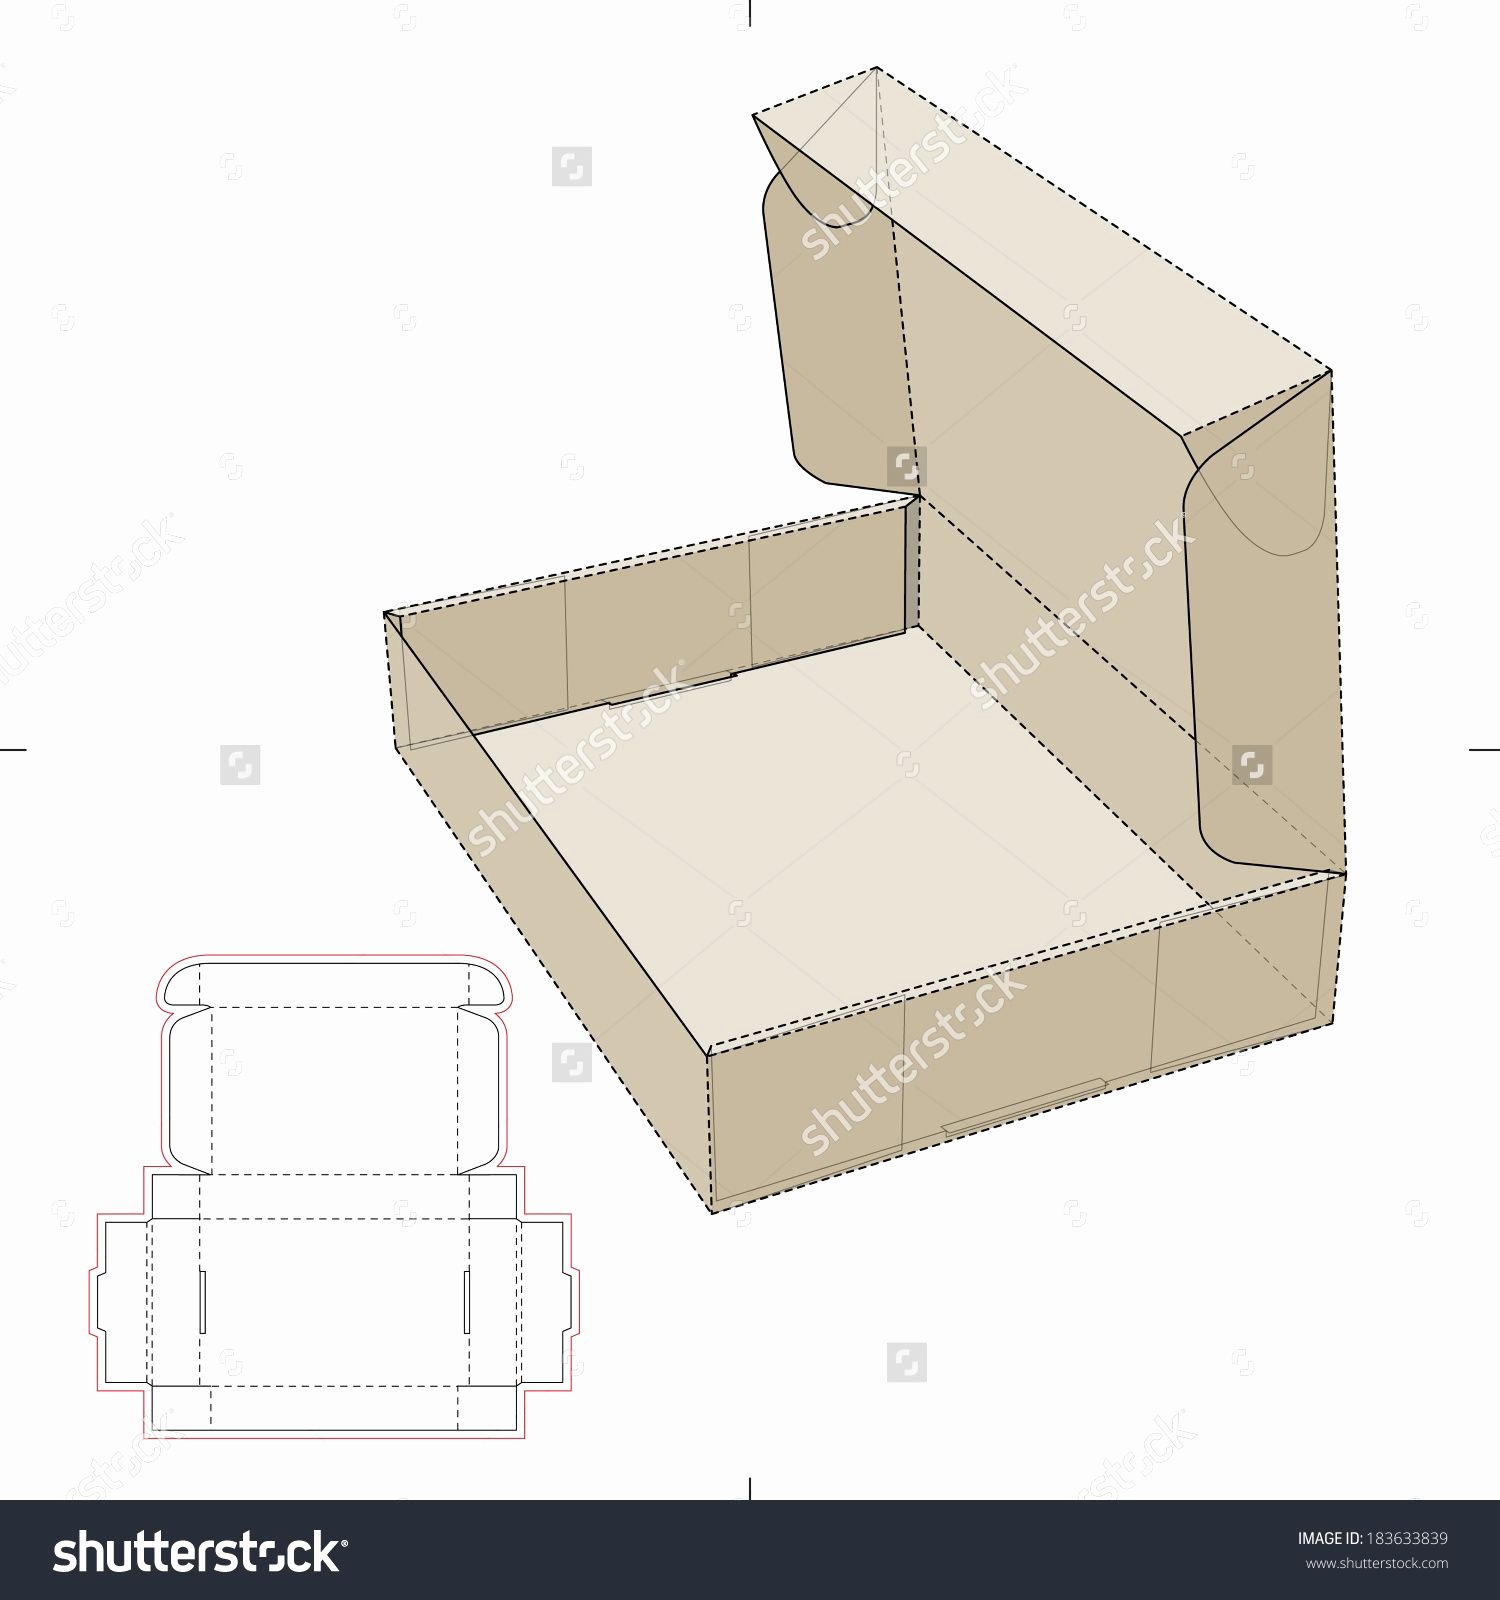 Box Cut Out Patterns Elegant Cardboard Flat Box with Die Cut Pattern Stock Vector